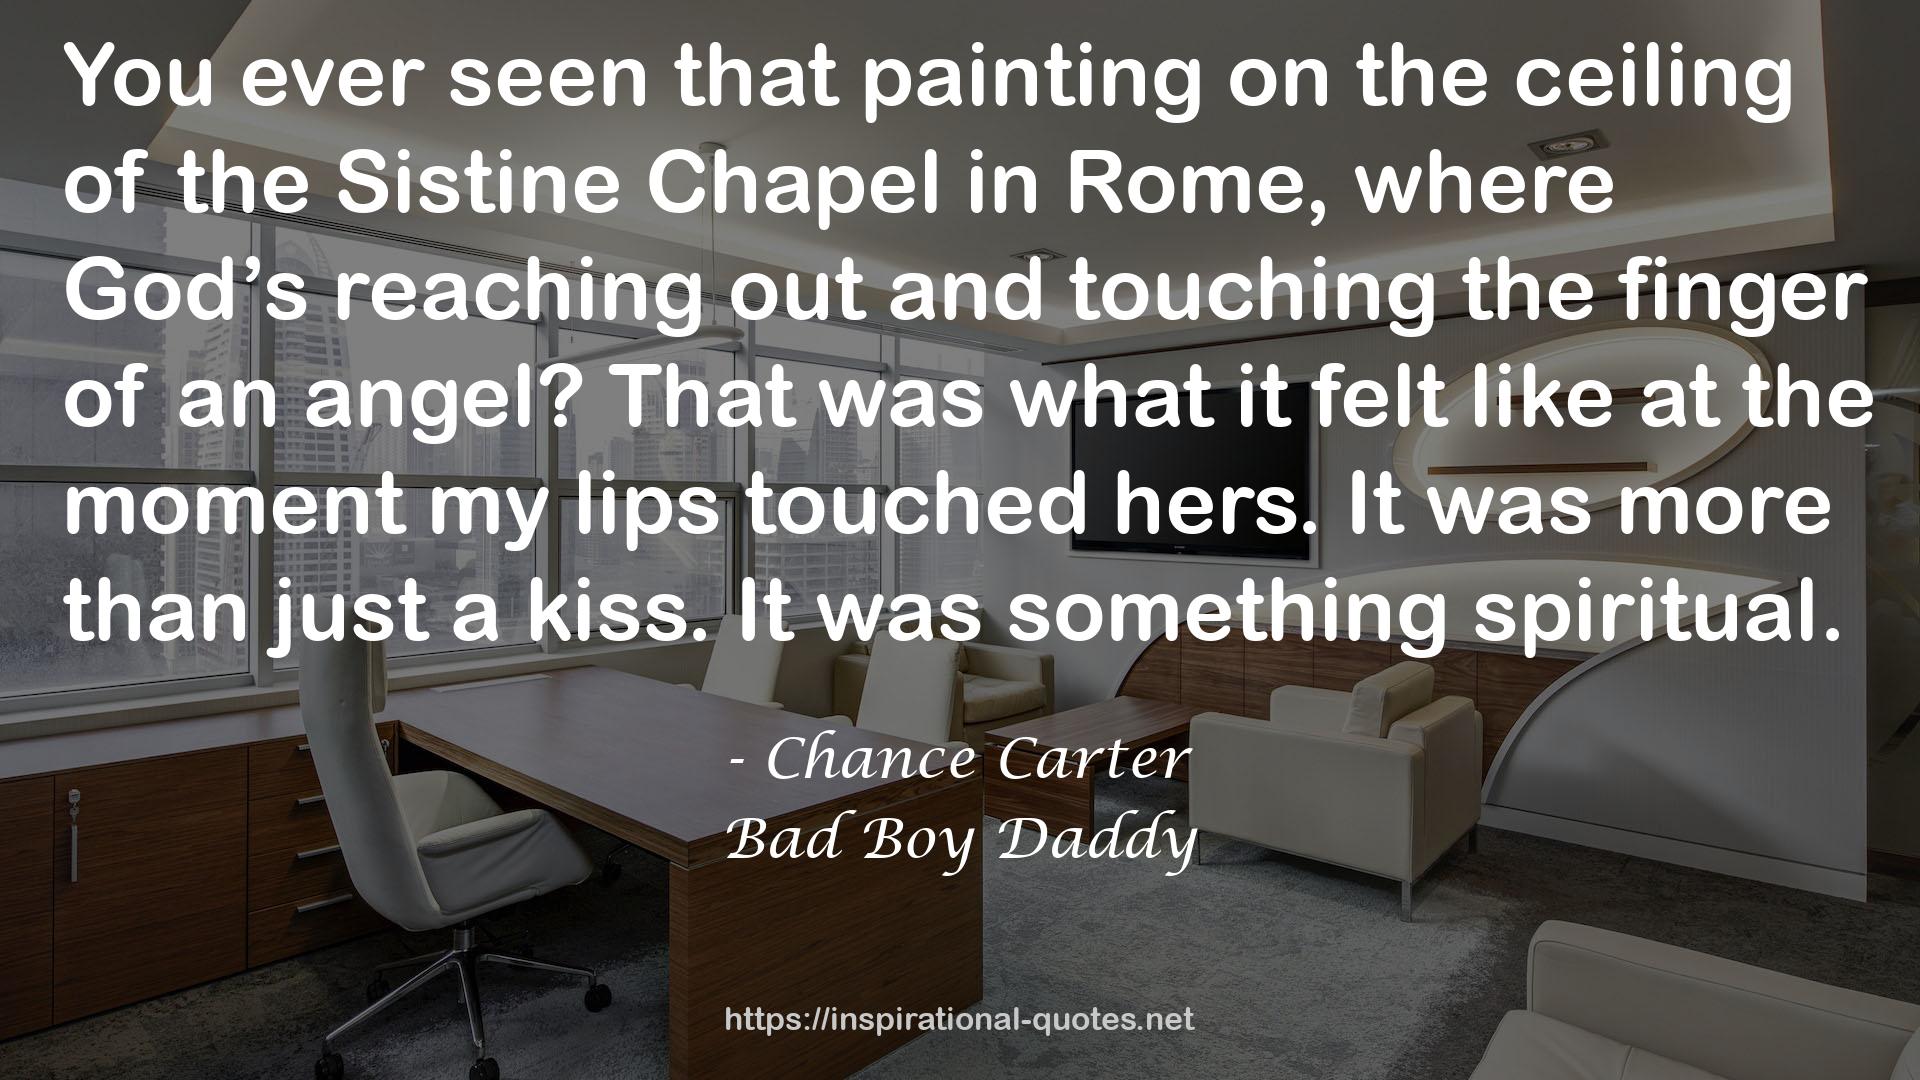 Bad Boy Daddy QUOTES